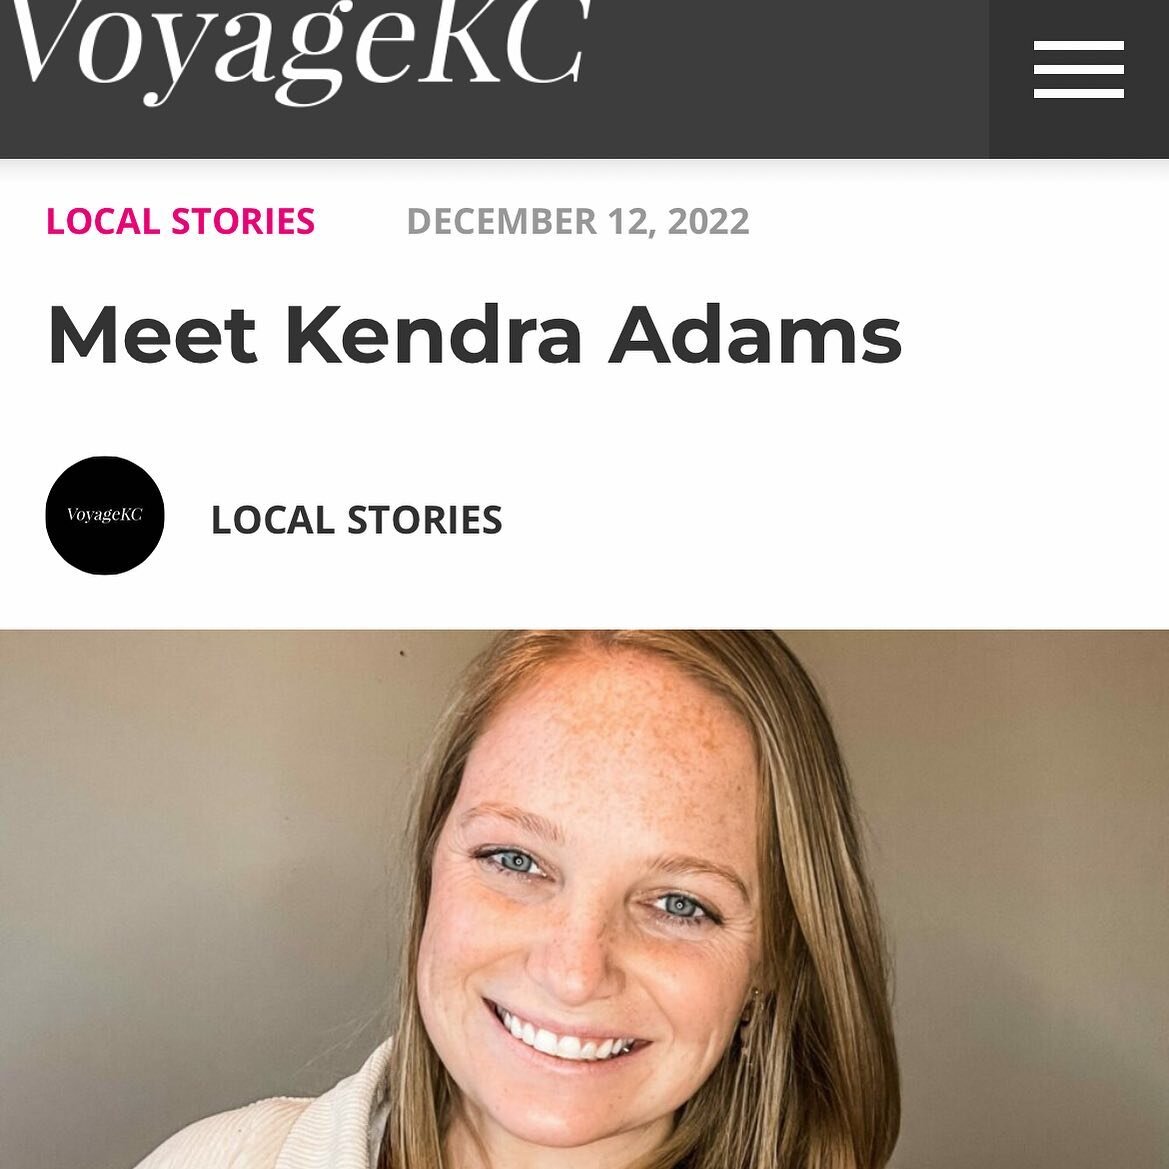 Can&rsquo;t believe how much has happened since moving back to Kansas City! I&rsquo;m absolutely honored to be featured in VoyageKC magazine! A day after I got my letterpress, VoyageKC magazine reached out to me for their Inspiring Stories series.

C